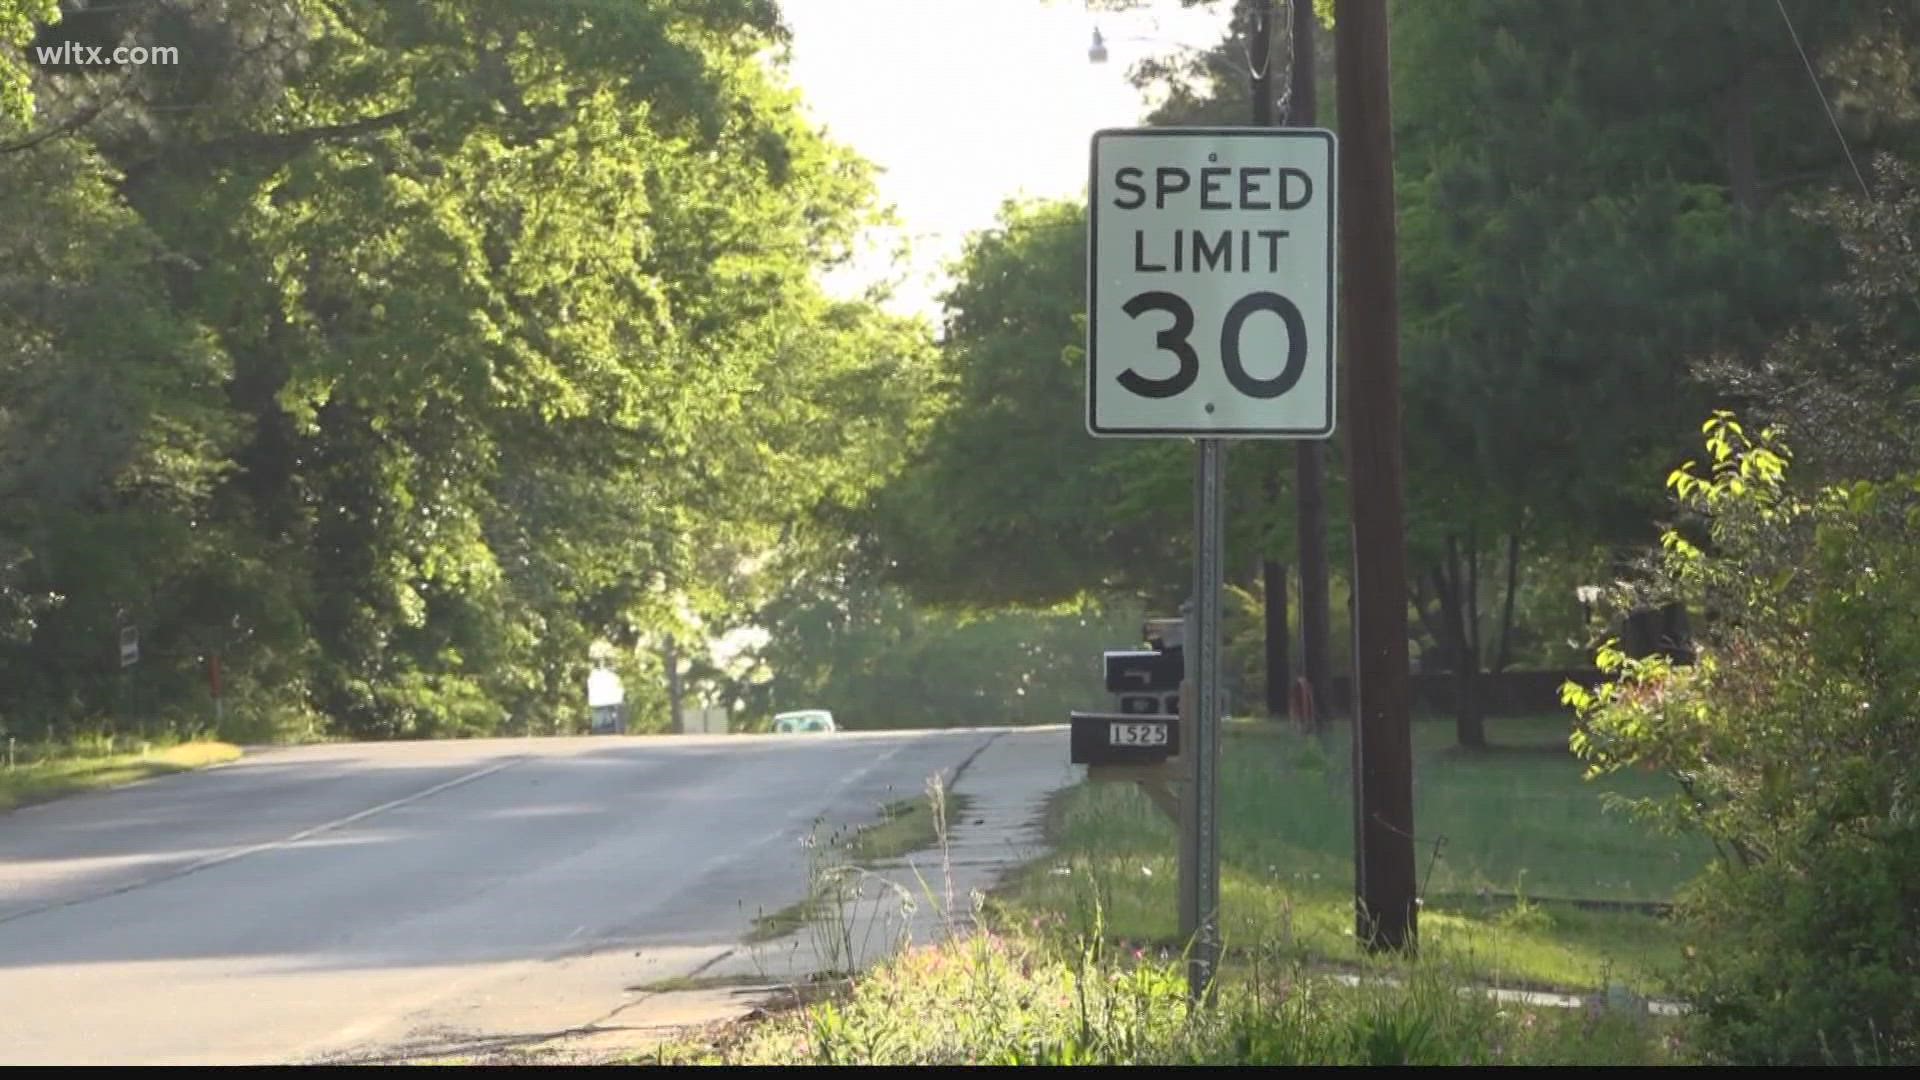 The Huffman Heights community off Broad River Road says its been dealing with loud, speeding drivers for years.